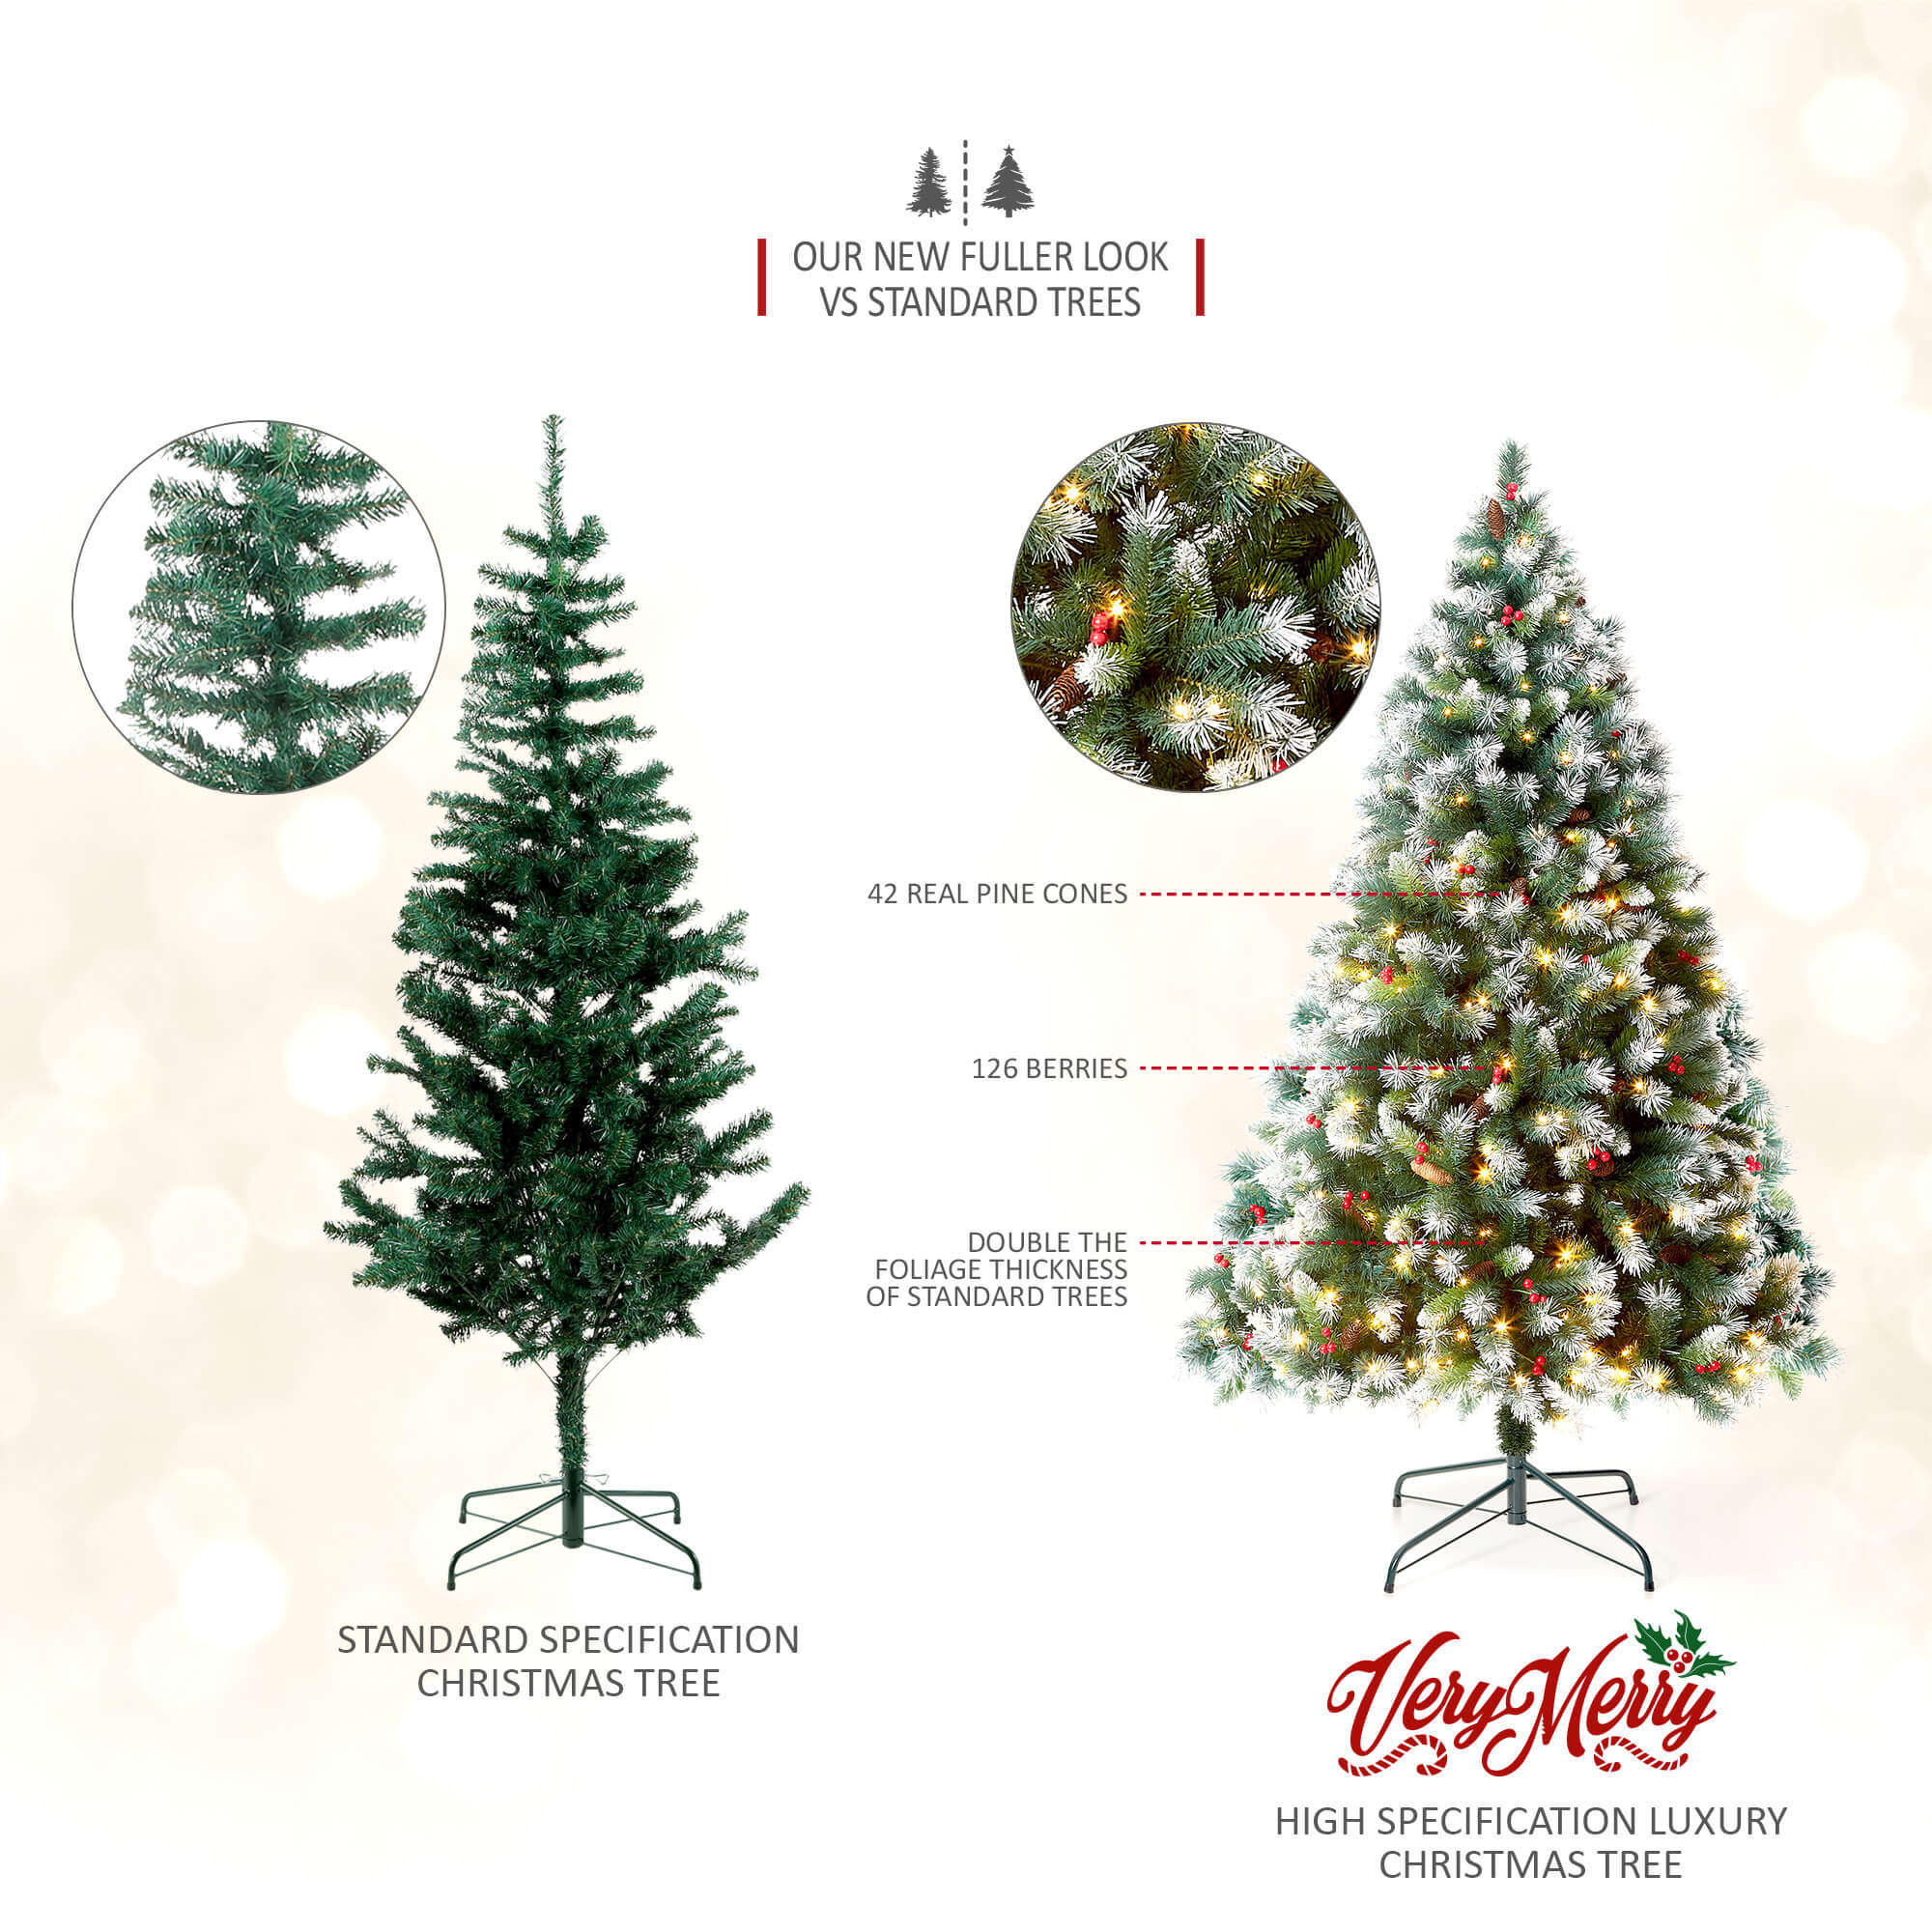 VeryMerry 5FT 'Claudia' Pre-Lit Christmas Tree with 200 Built-In Warm White LED Lights with Auto-Off Timer, 8 Lighting Modes, Decorative Pinecones and Berries